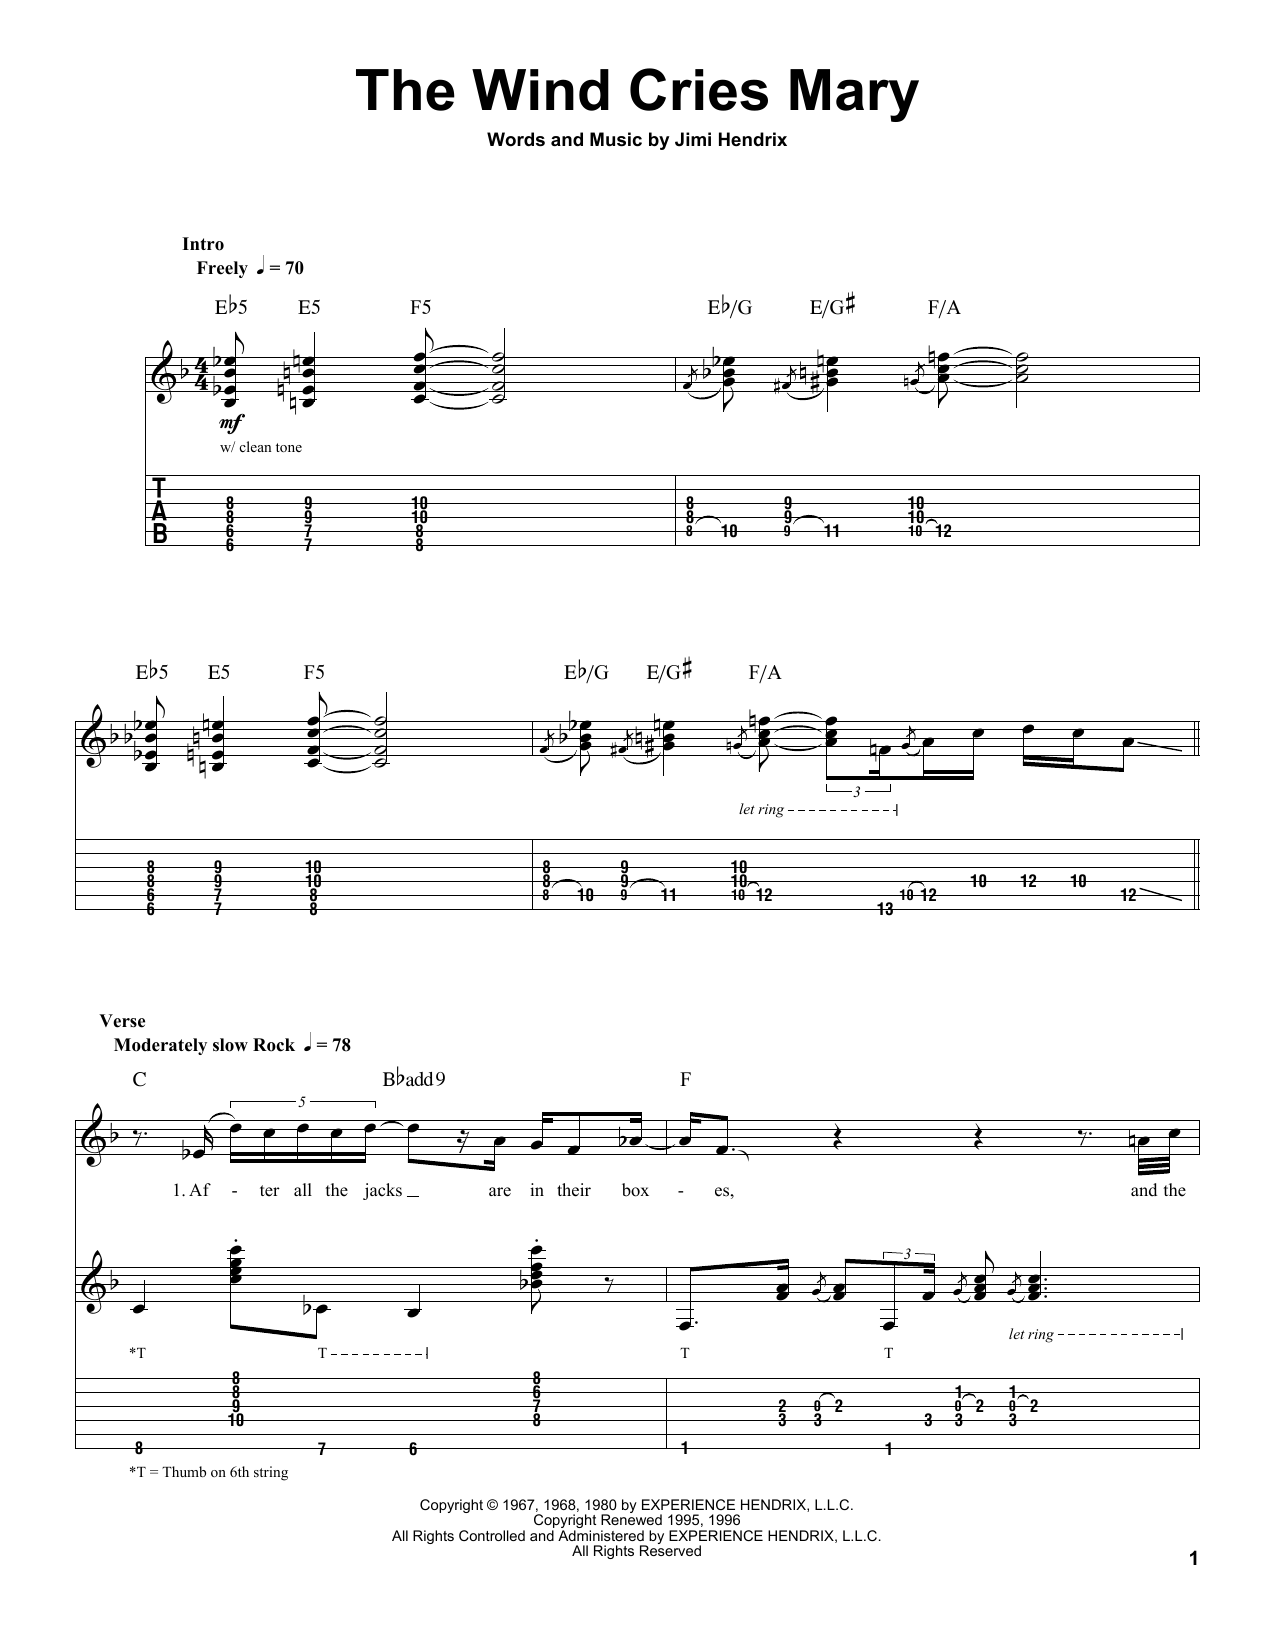 Download Jimi Hendrix The Wind Cries Mary Sheet Music